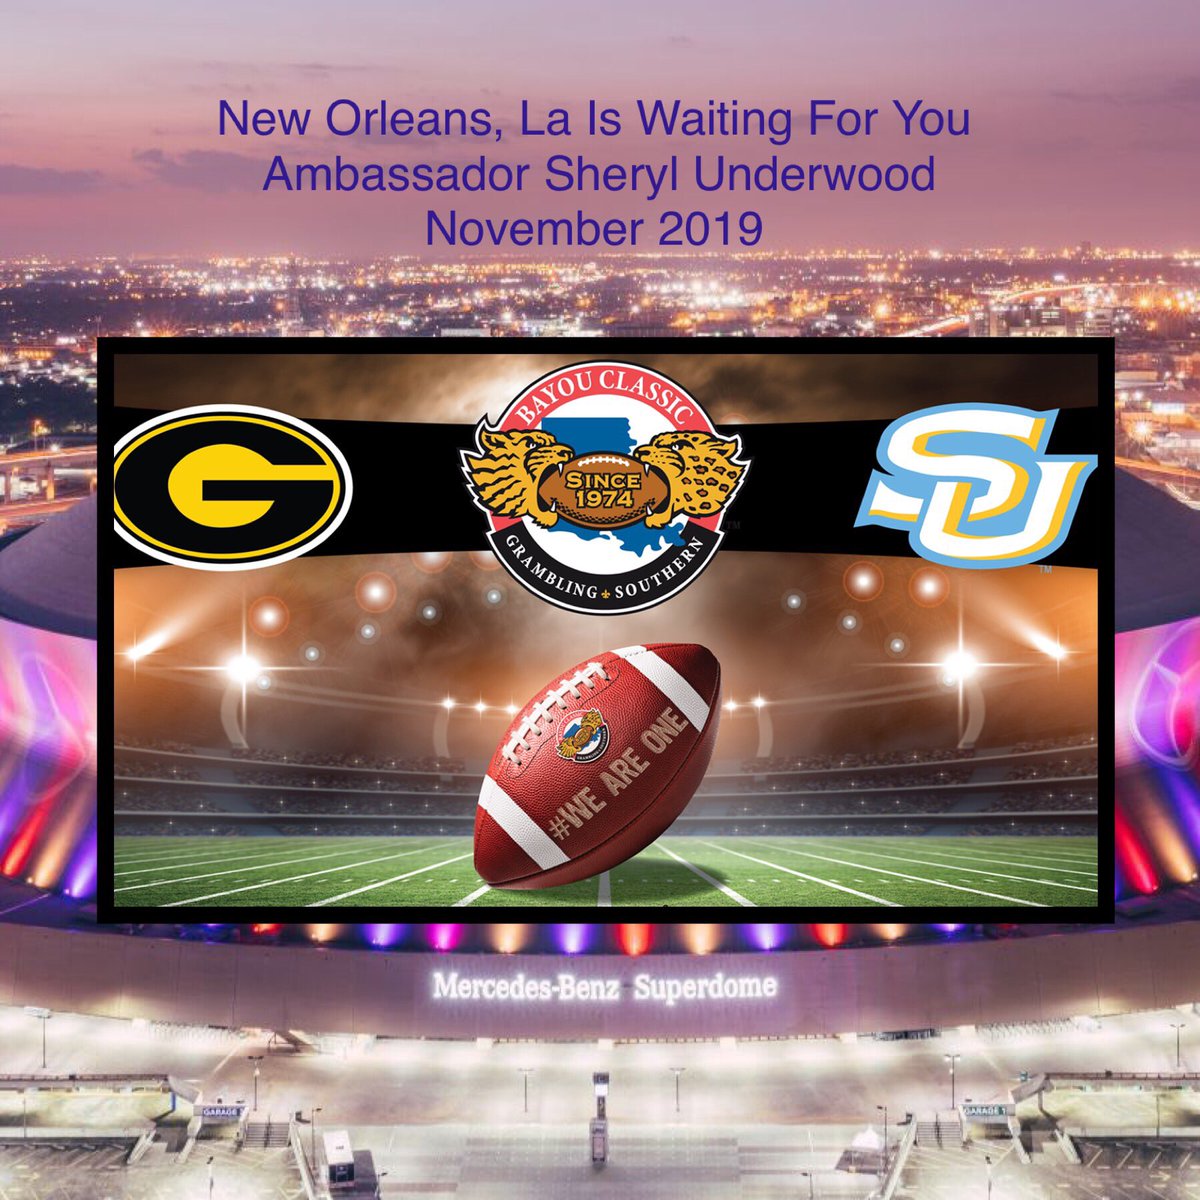 @sherylunderwood Sheryl, I see everything aligned itself for you to bring your “#Genius” to #Louisiana as the #Ambassador of the 4️⃣6️⃣th Annual #BayouClassic! 
If anyone can spread awareness of #HistoricallyBlackCollegesAndUniversities, #YouCan!
#HBCUPower @TheTalkCBS @BayouClassic74 🏈#Lover